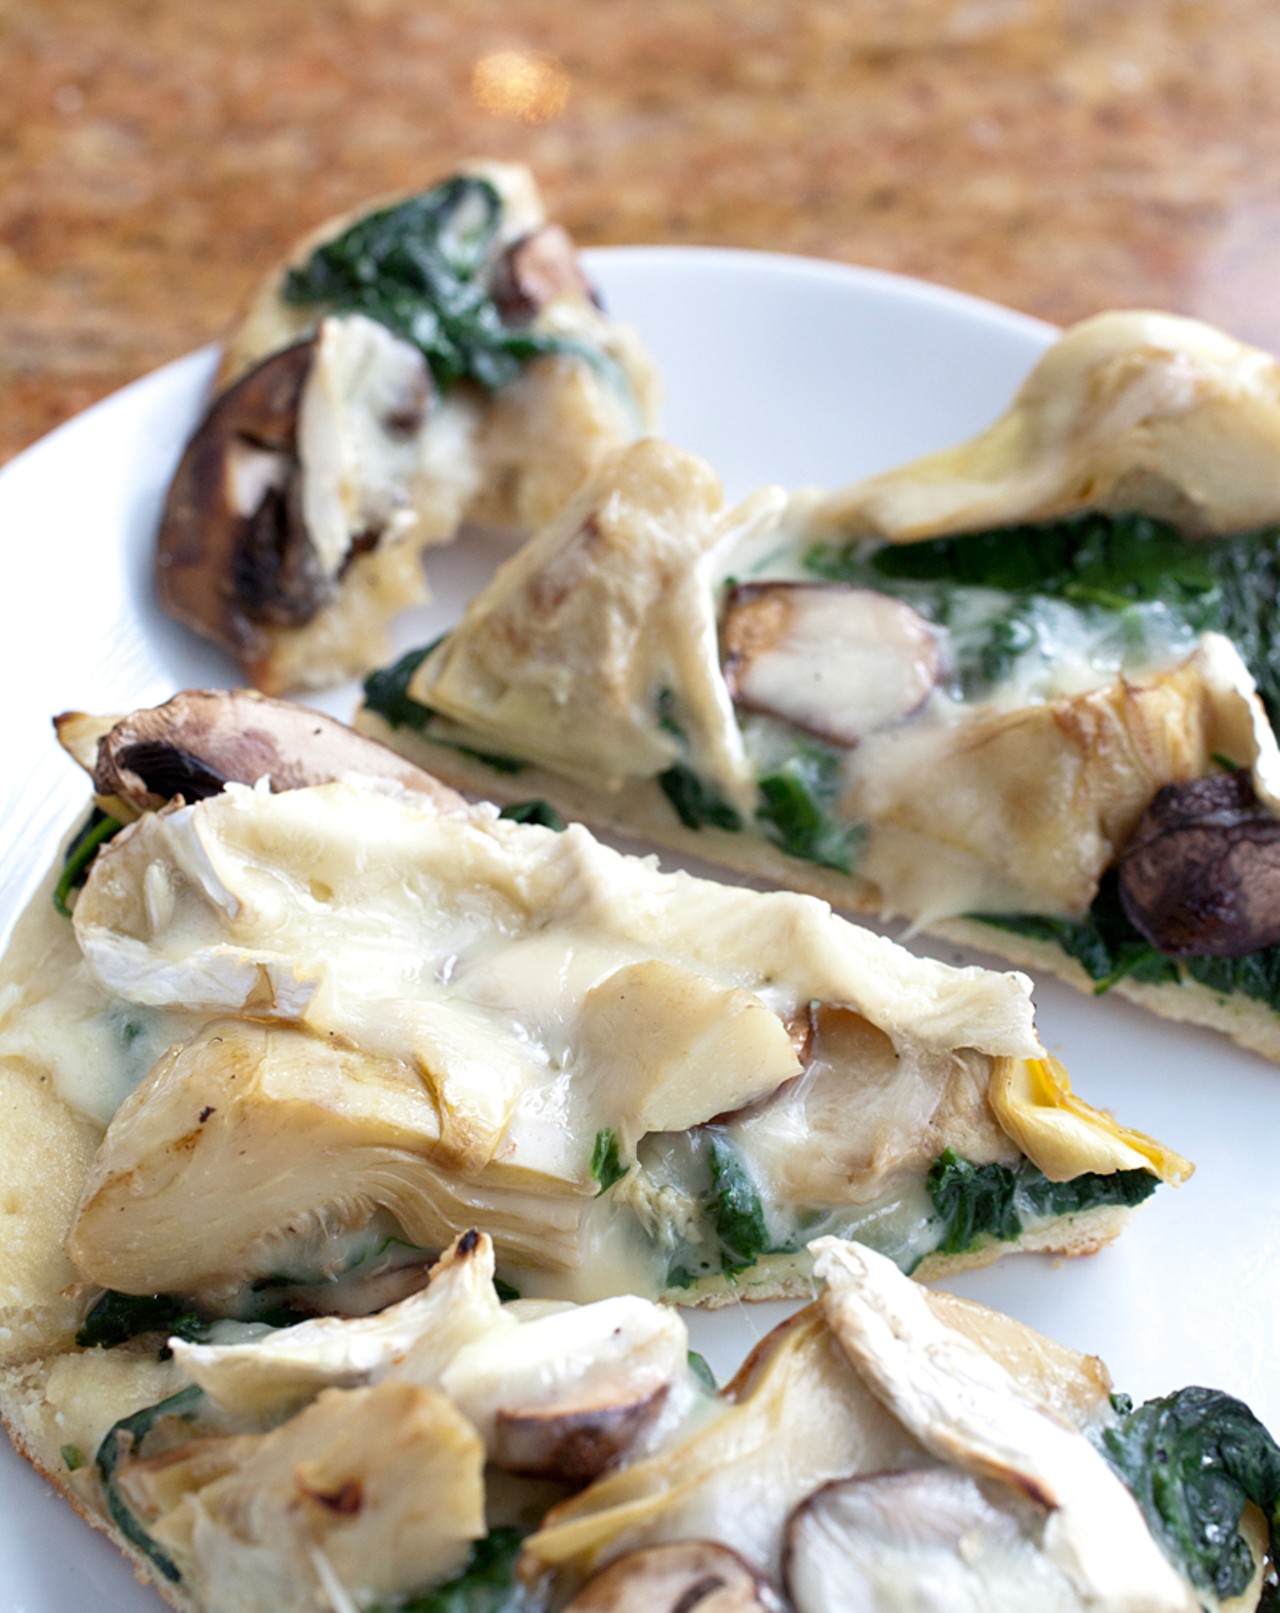 Roasted-artichoke flatbread with portabella mushrooms, spinach and Camembert cheese.